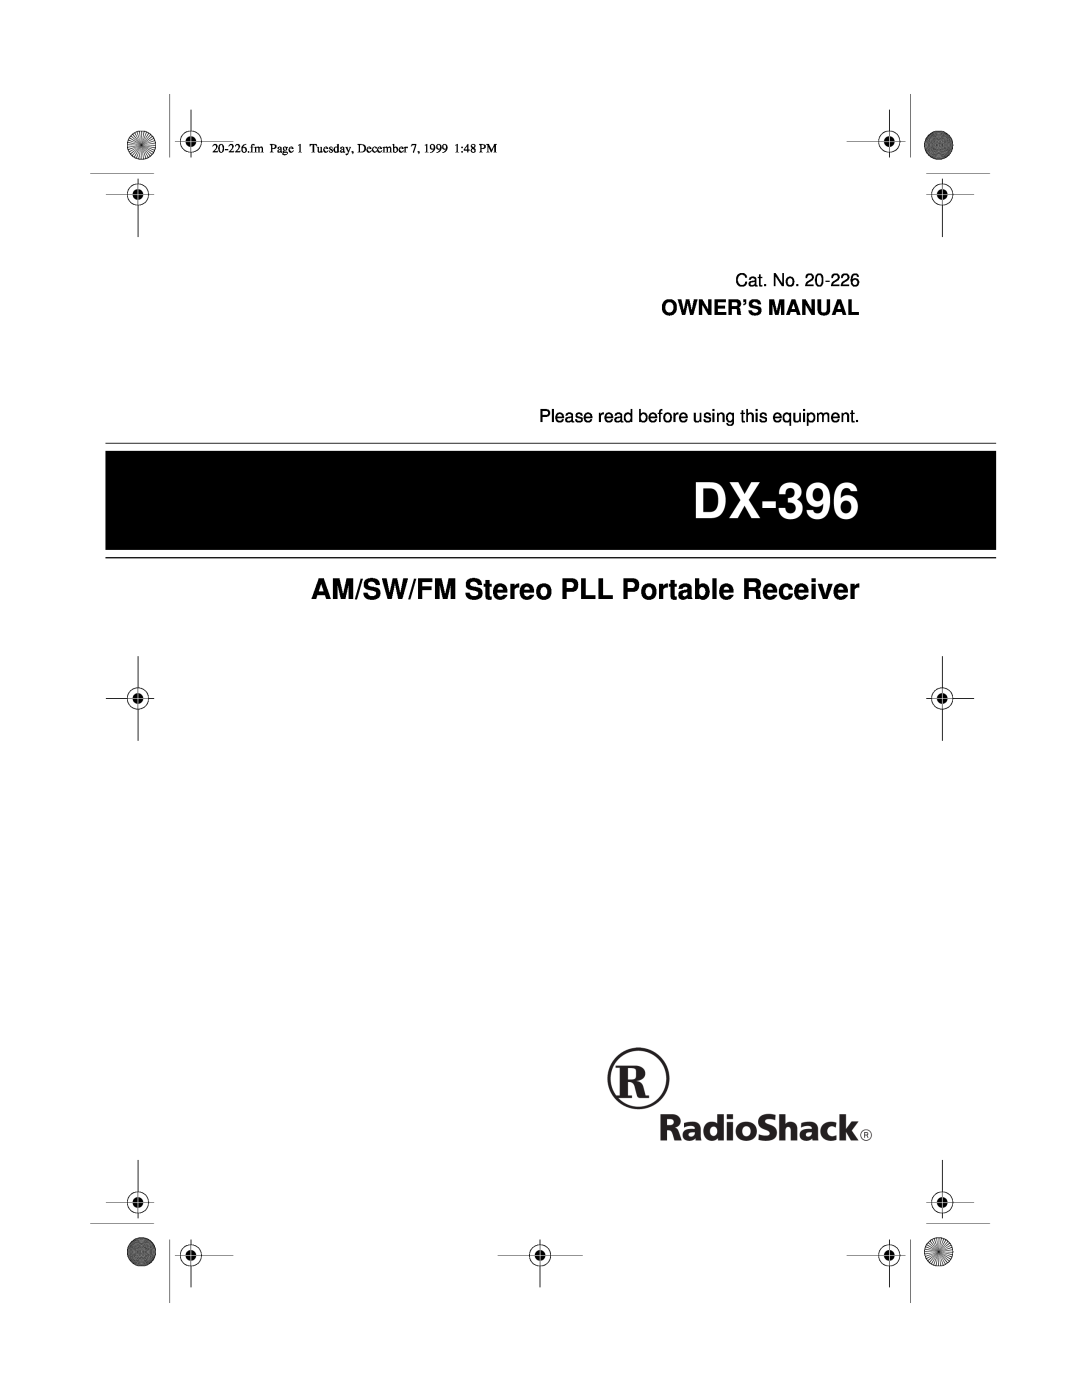 Radio Shack DX-396 owner manual AM/SW/FM Stereo PLL Portable Receiver 